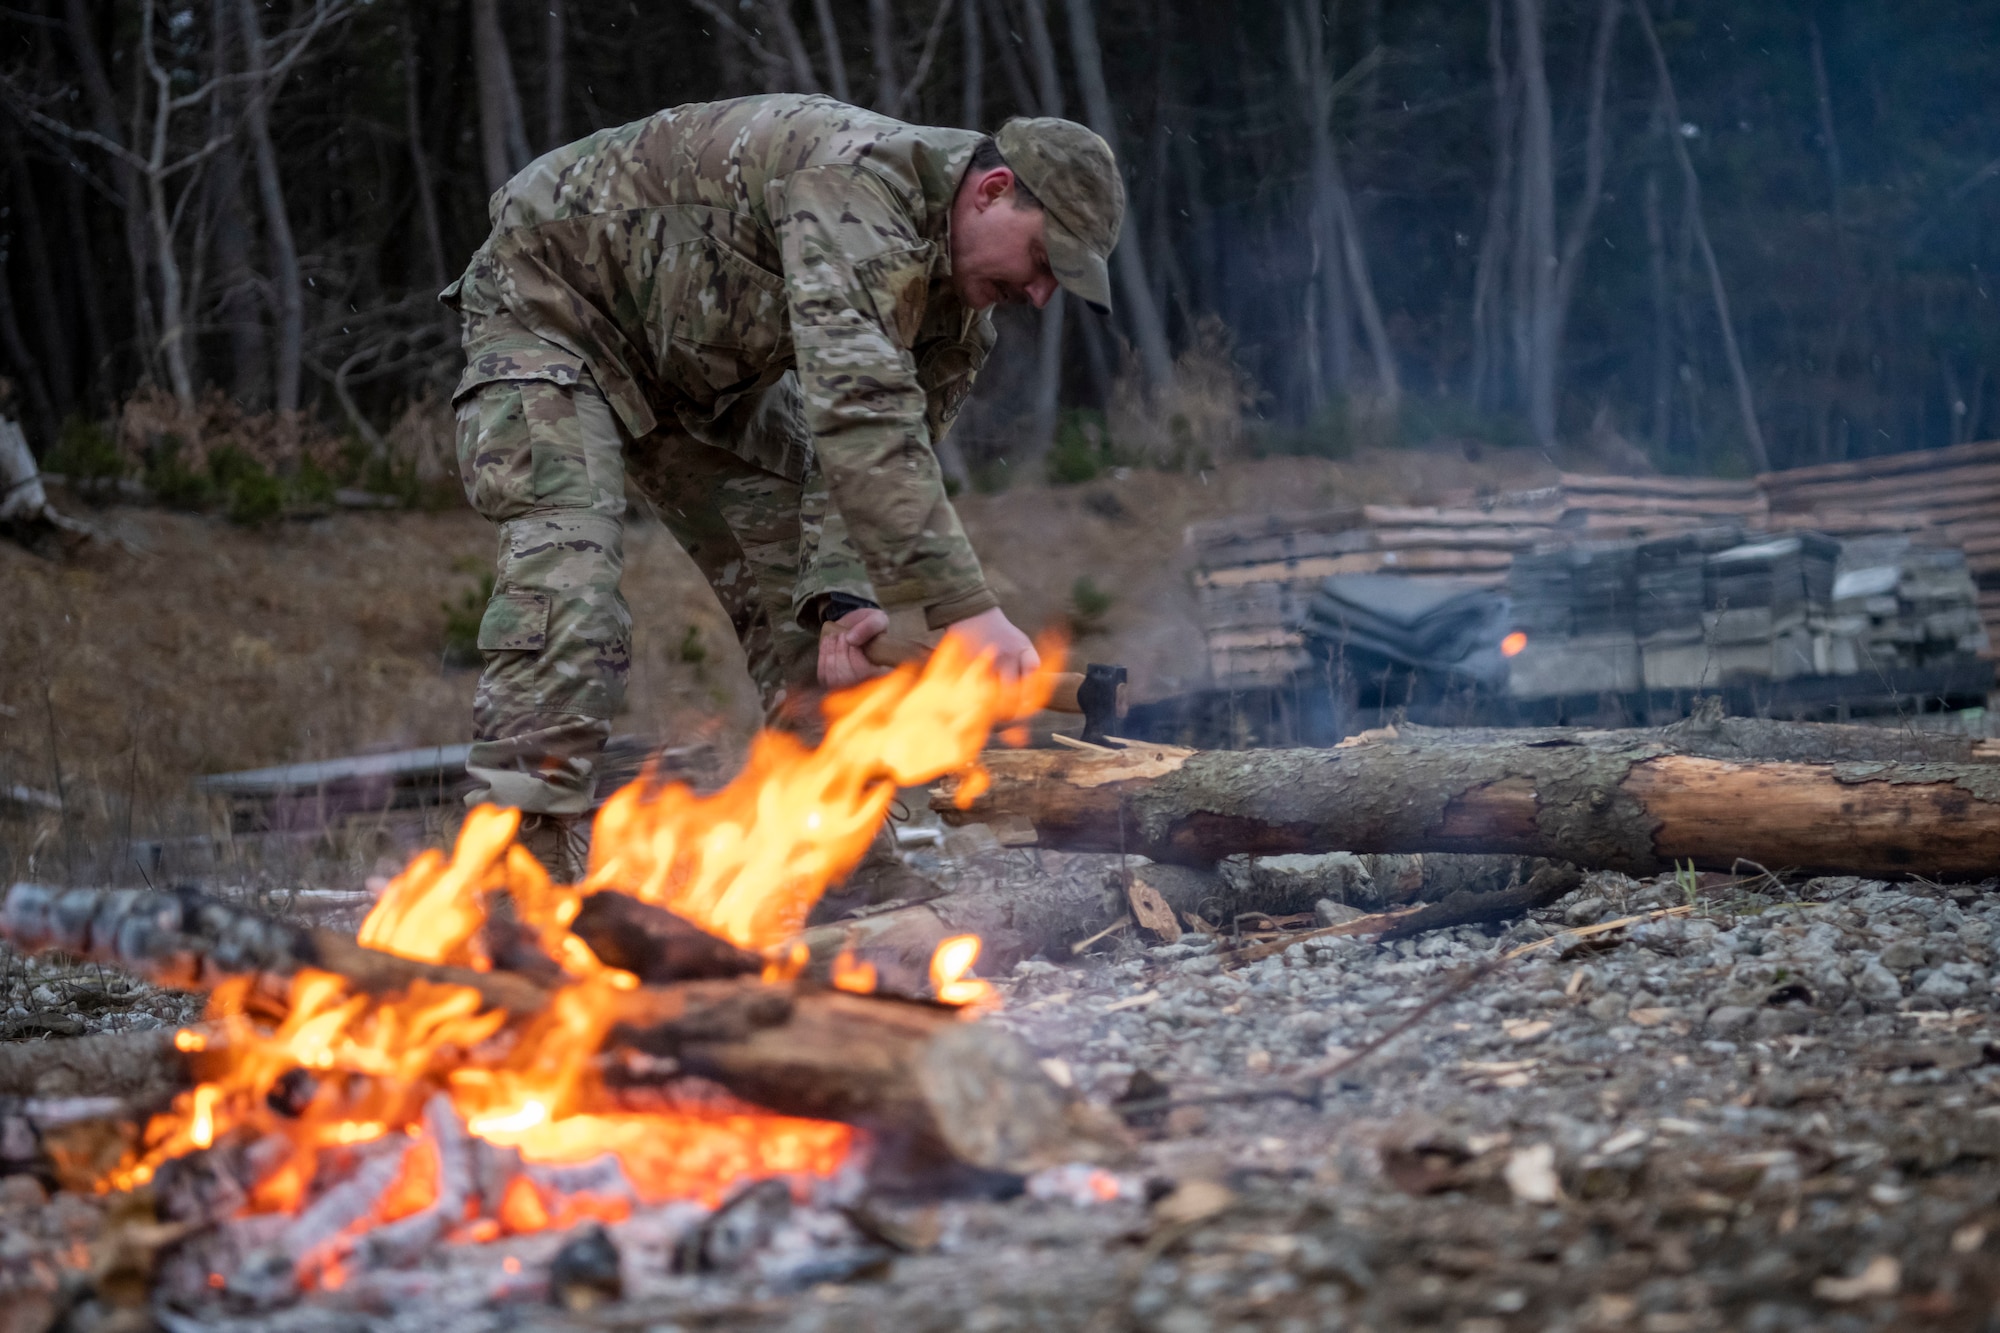 U.S. Air Force Staff Sgt. Dalton Deboer, 35th Operations Group Support Squadron survival, evasion, resistance and escape (SERE) specialist, chops wood for a fire during a fire building demonstration at Draughn Range near Misawa Air Base, Japan.